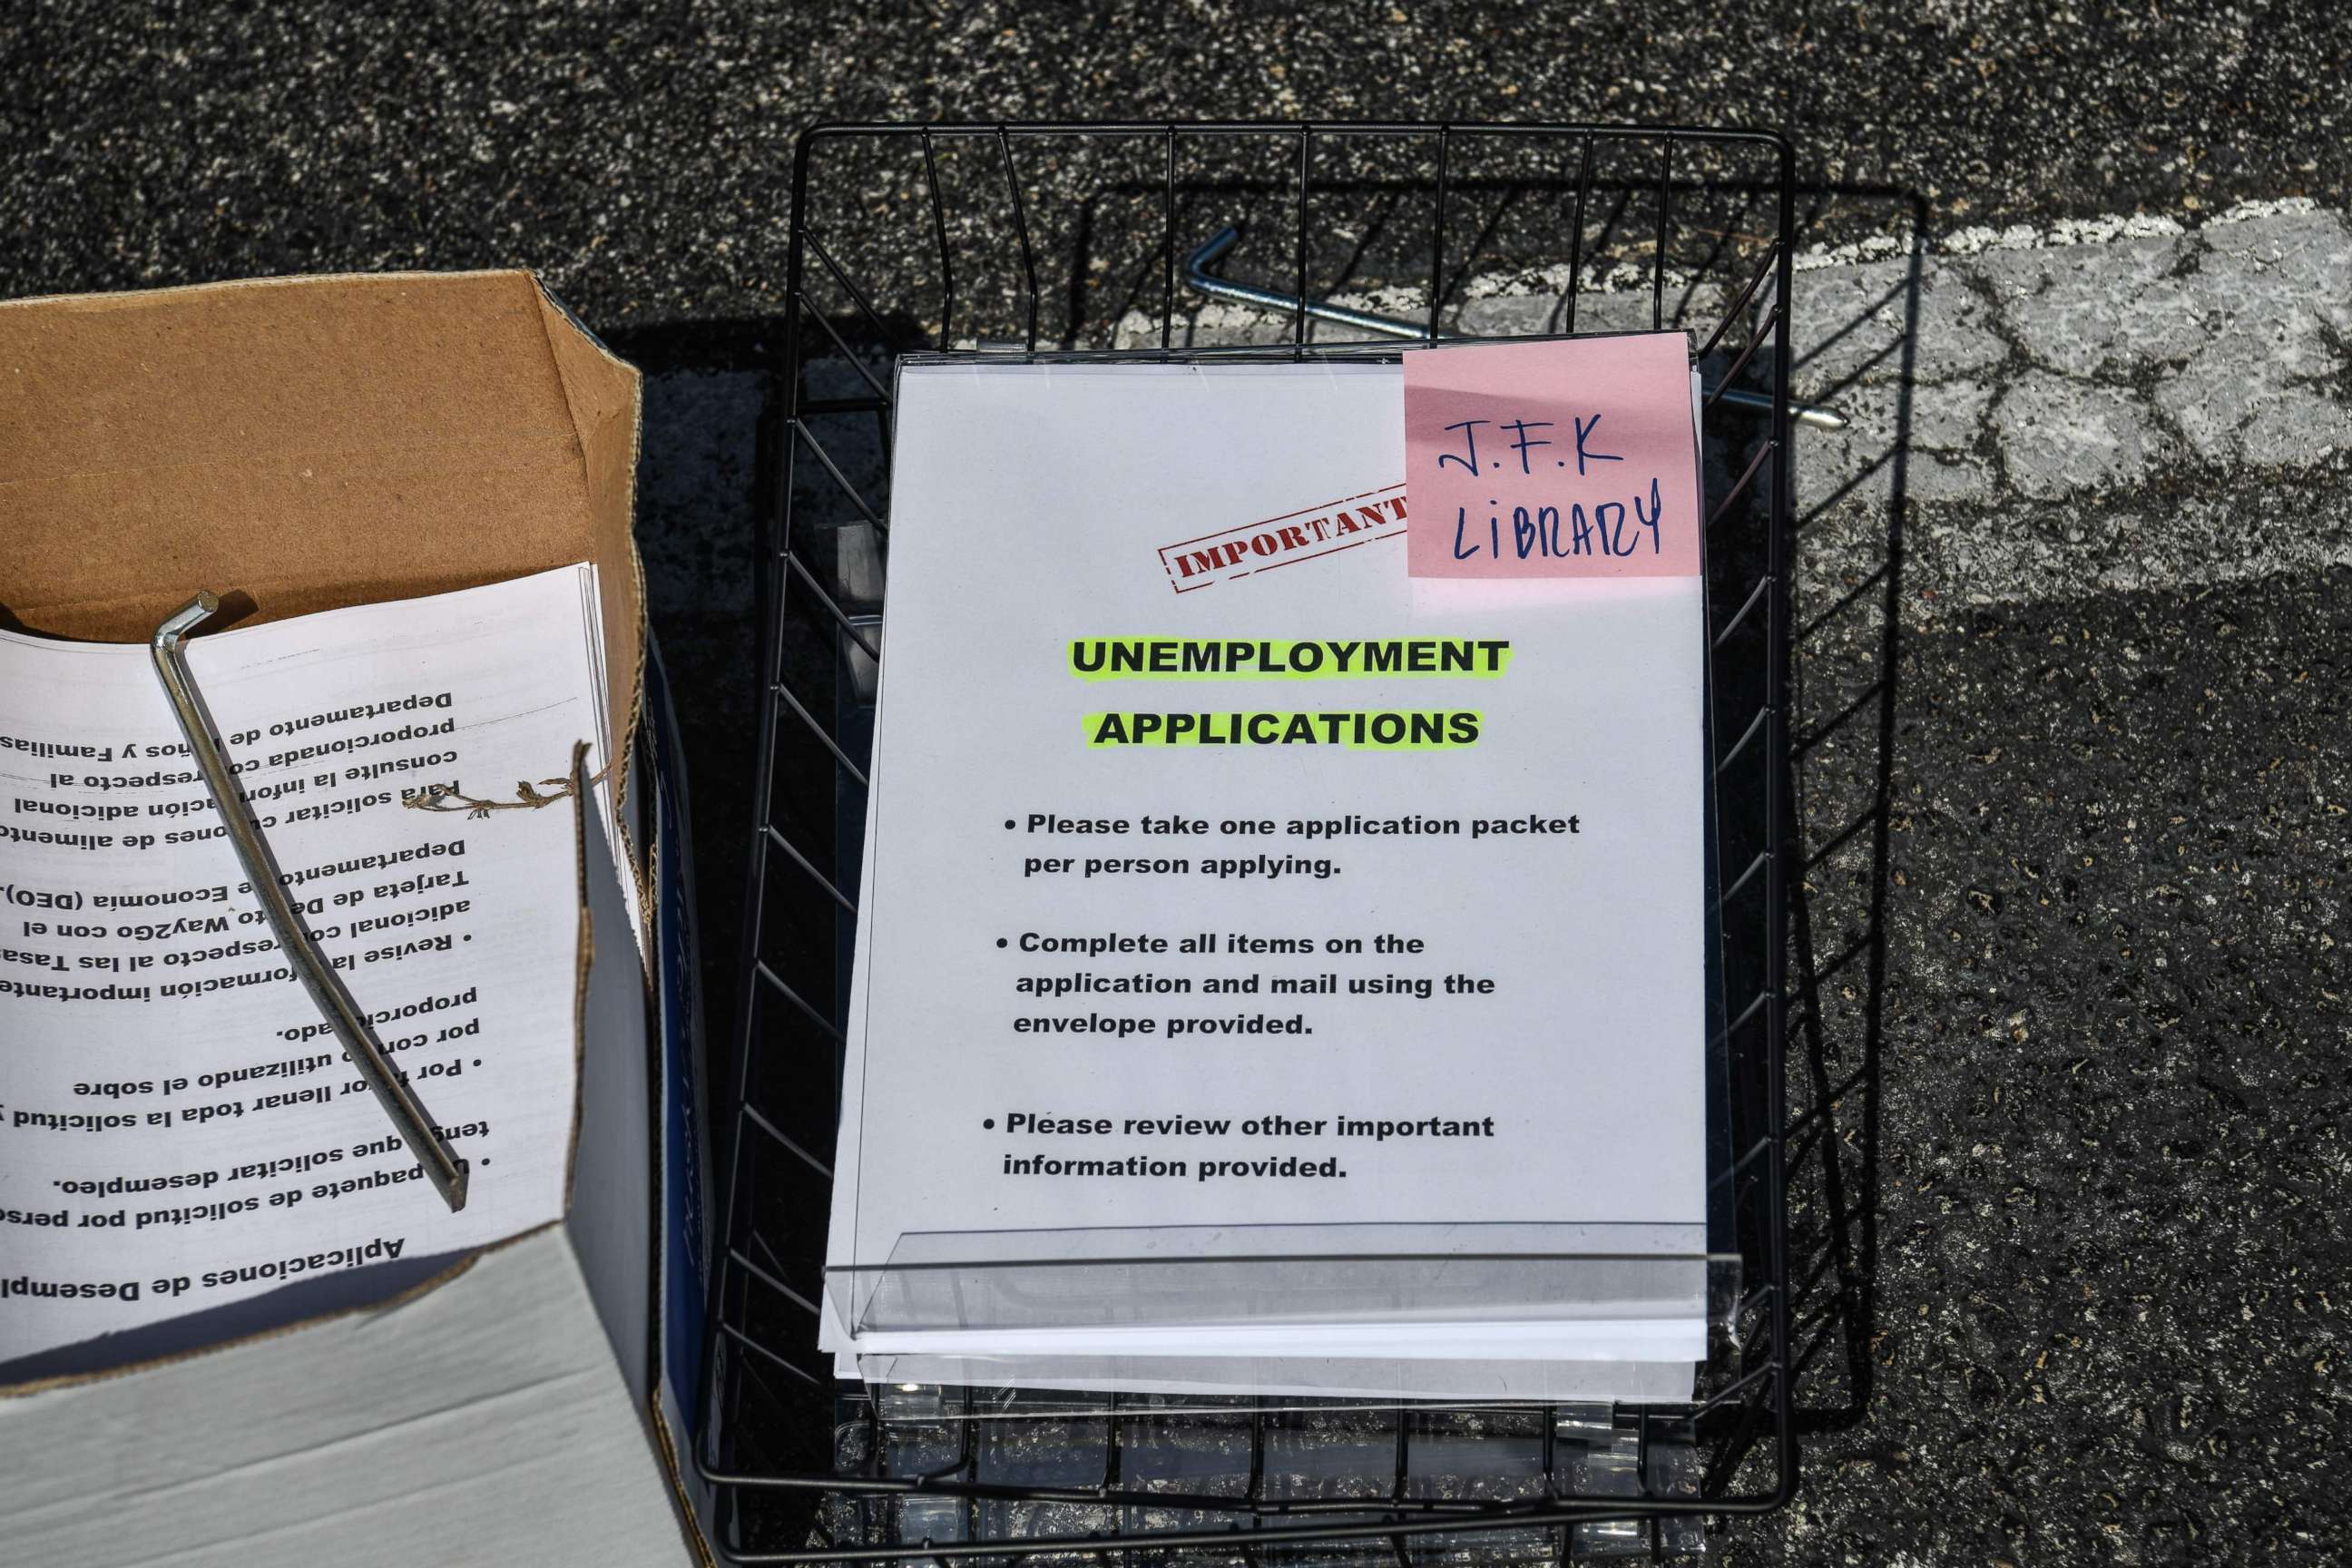 PHOTO: In this file photo taken on April 8, 2020, unemployment forms are kept at a drive through collection point outside the John F. Kennedy Library in Hialeah, Fla.